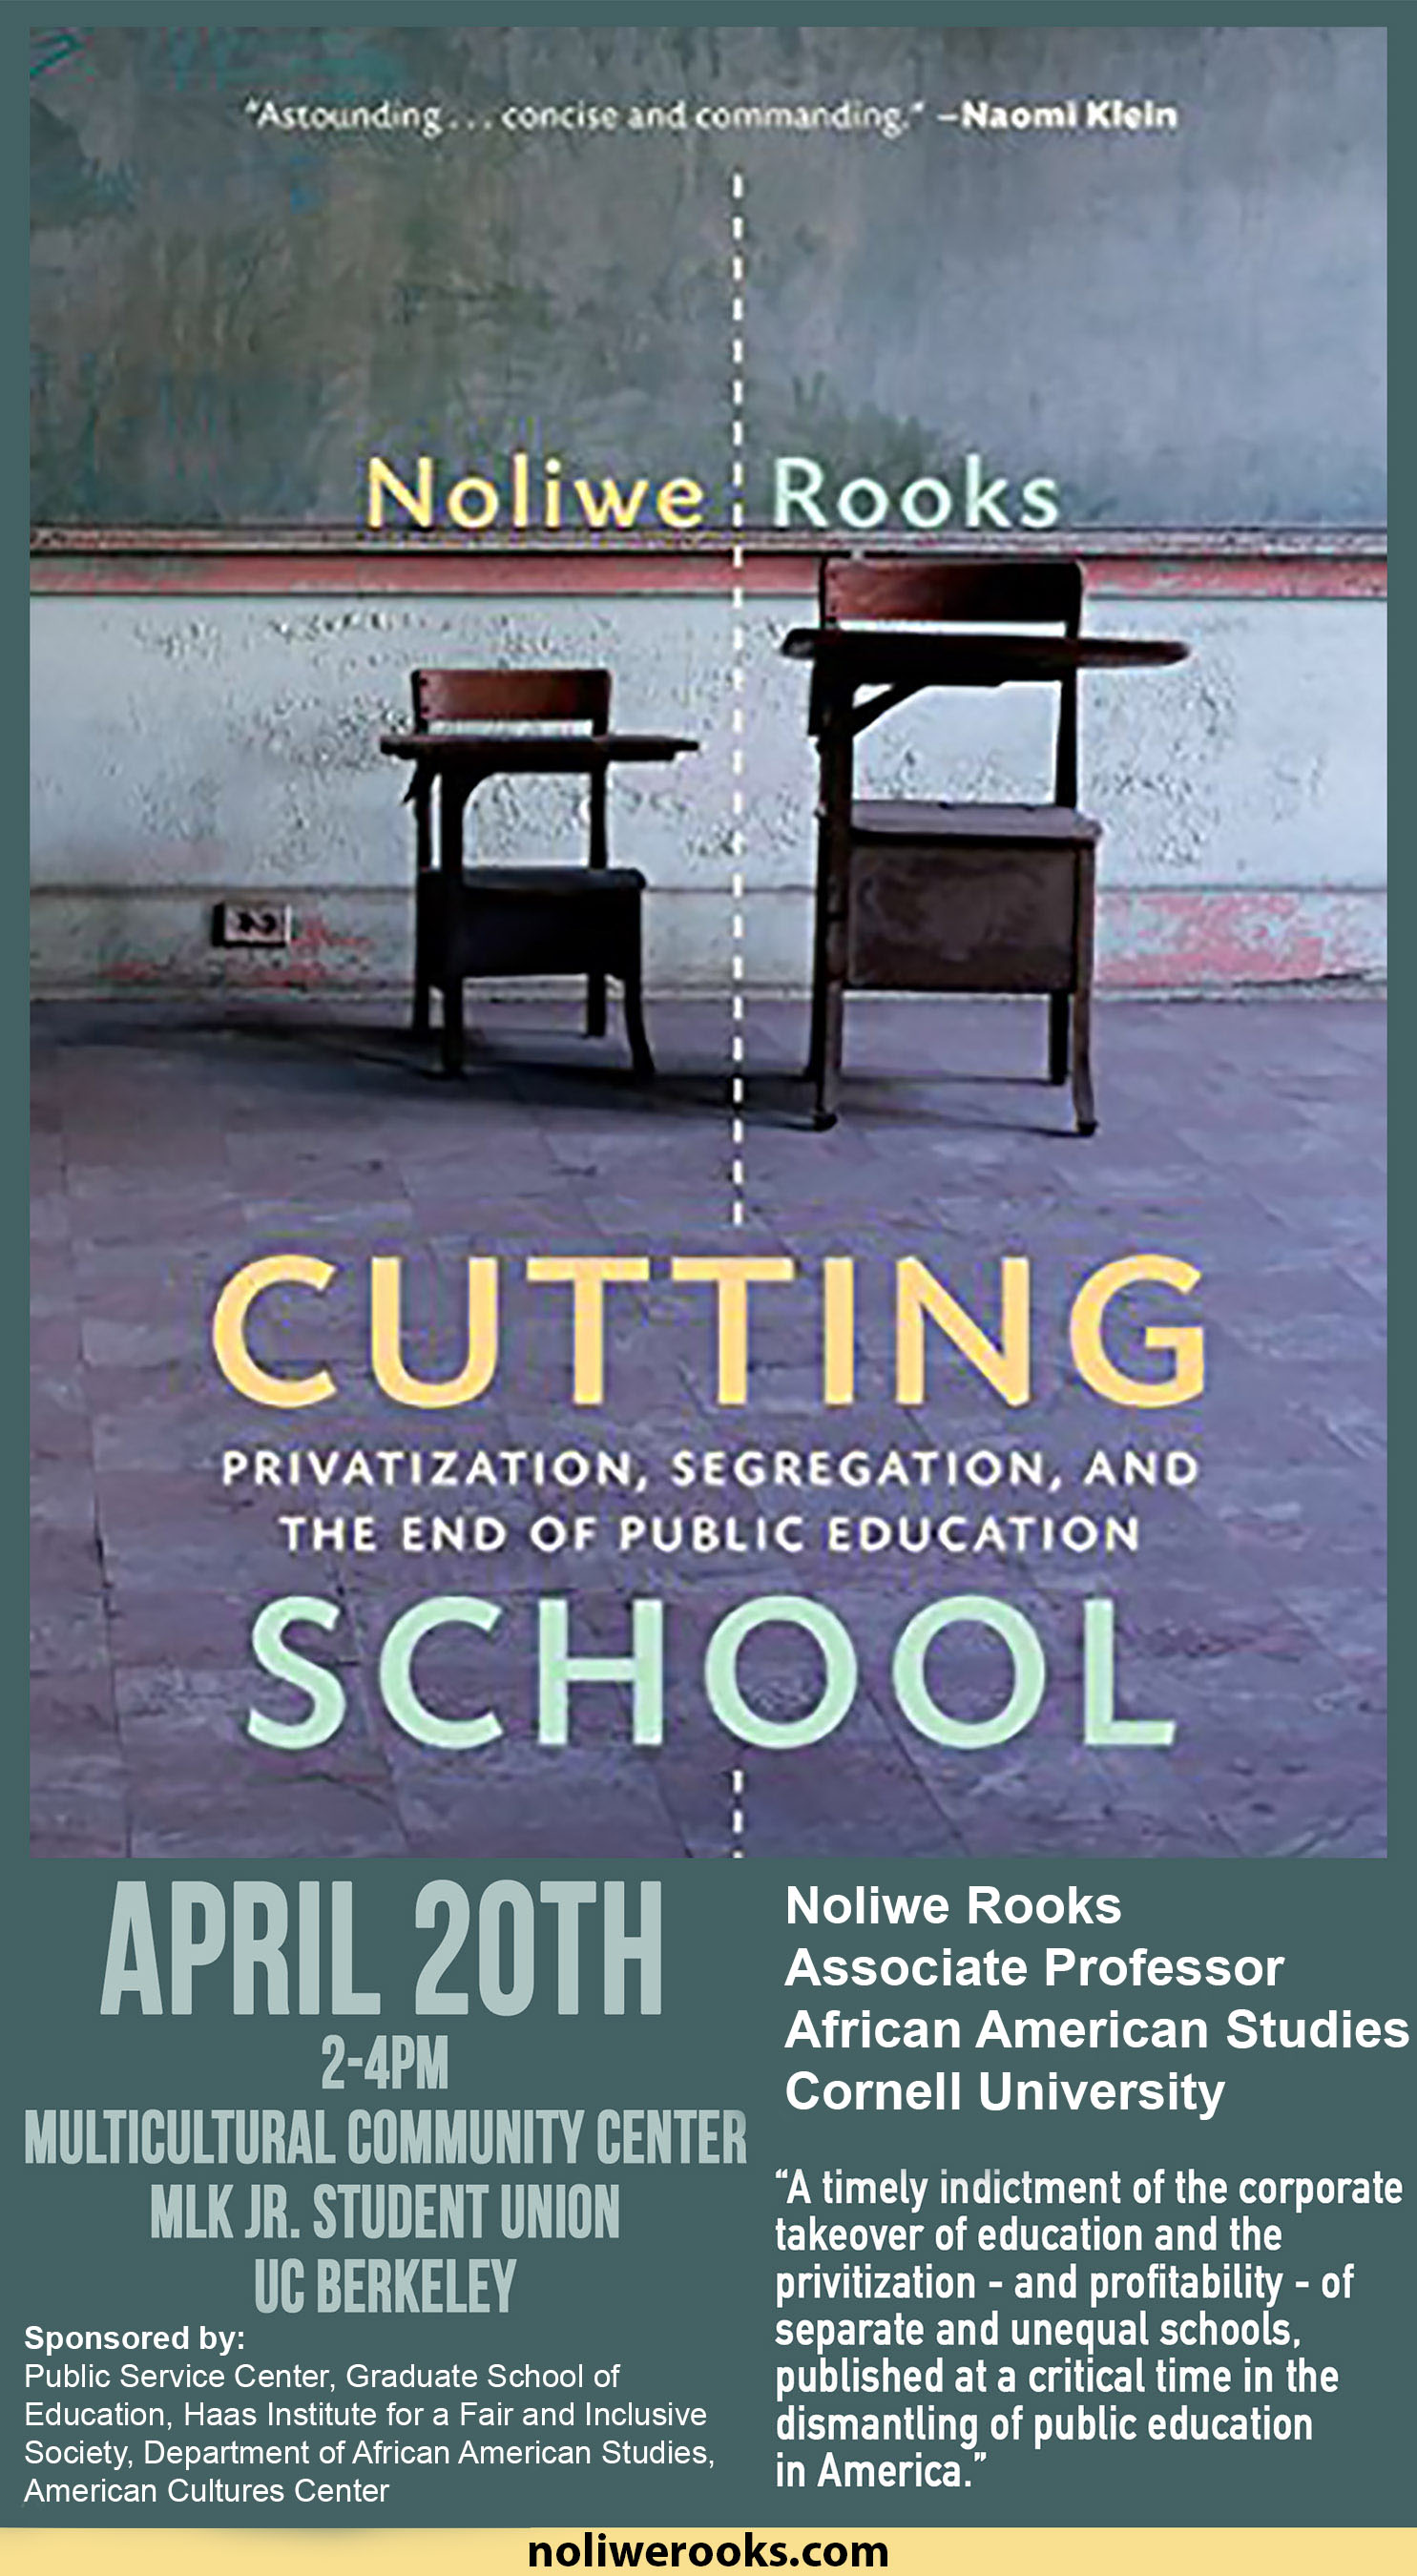 Image on Cutting School with Noliwe Rooks